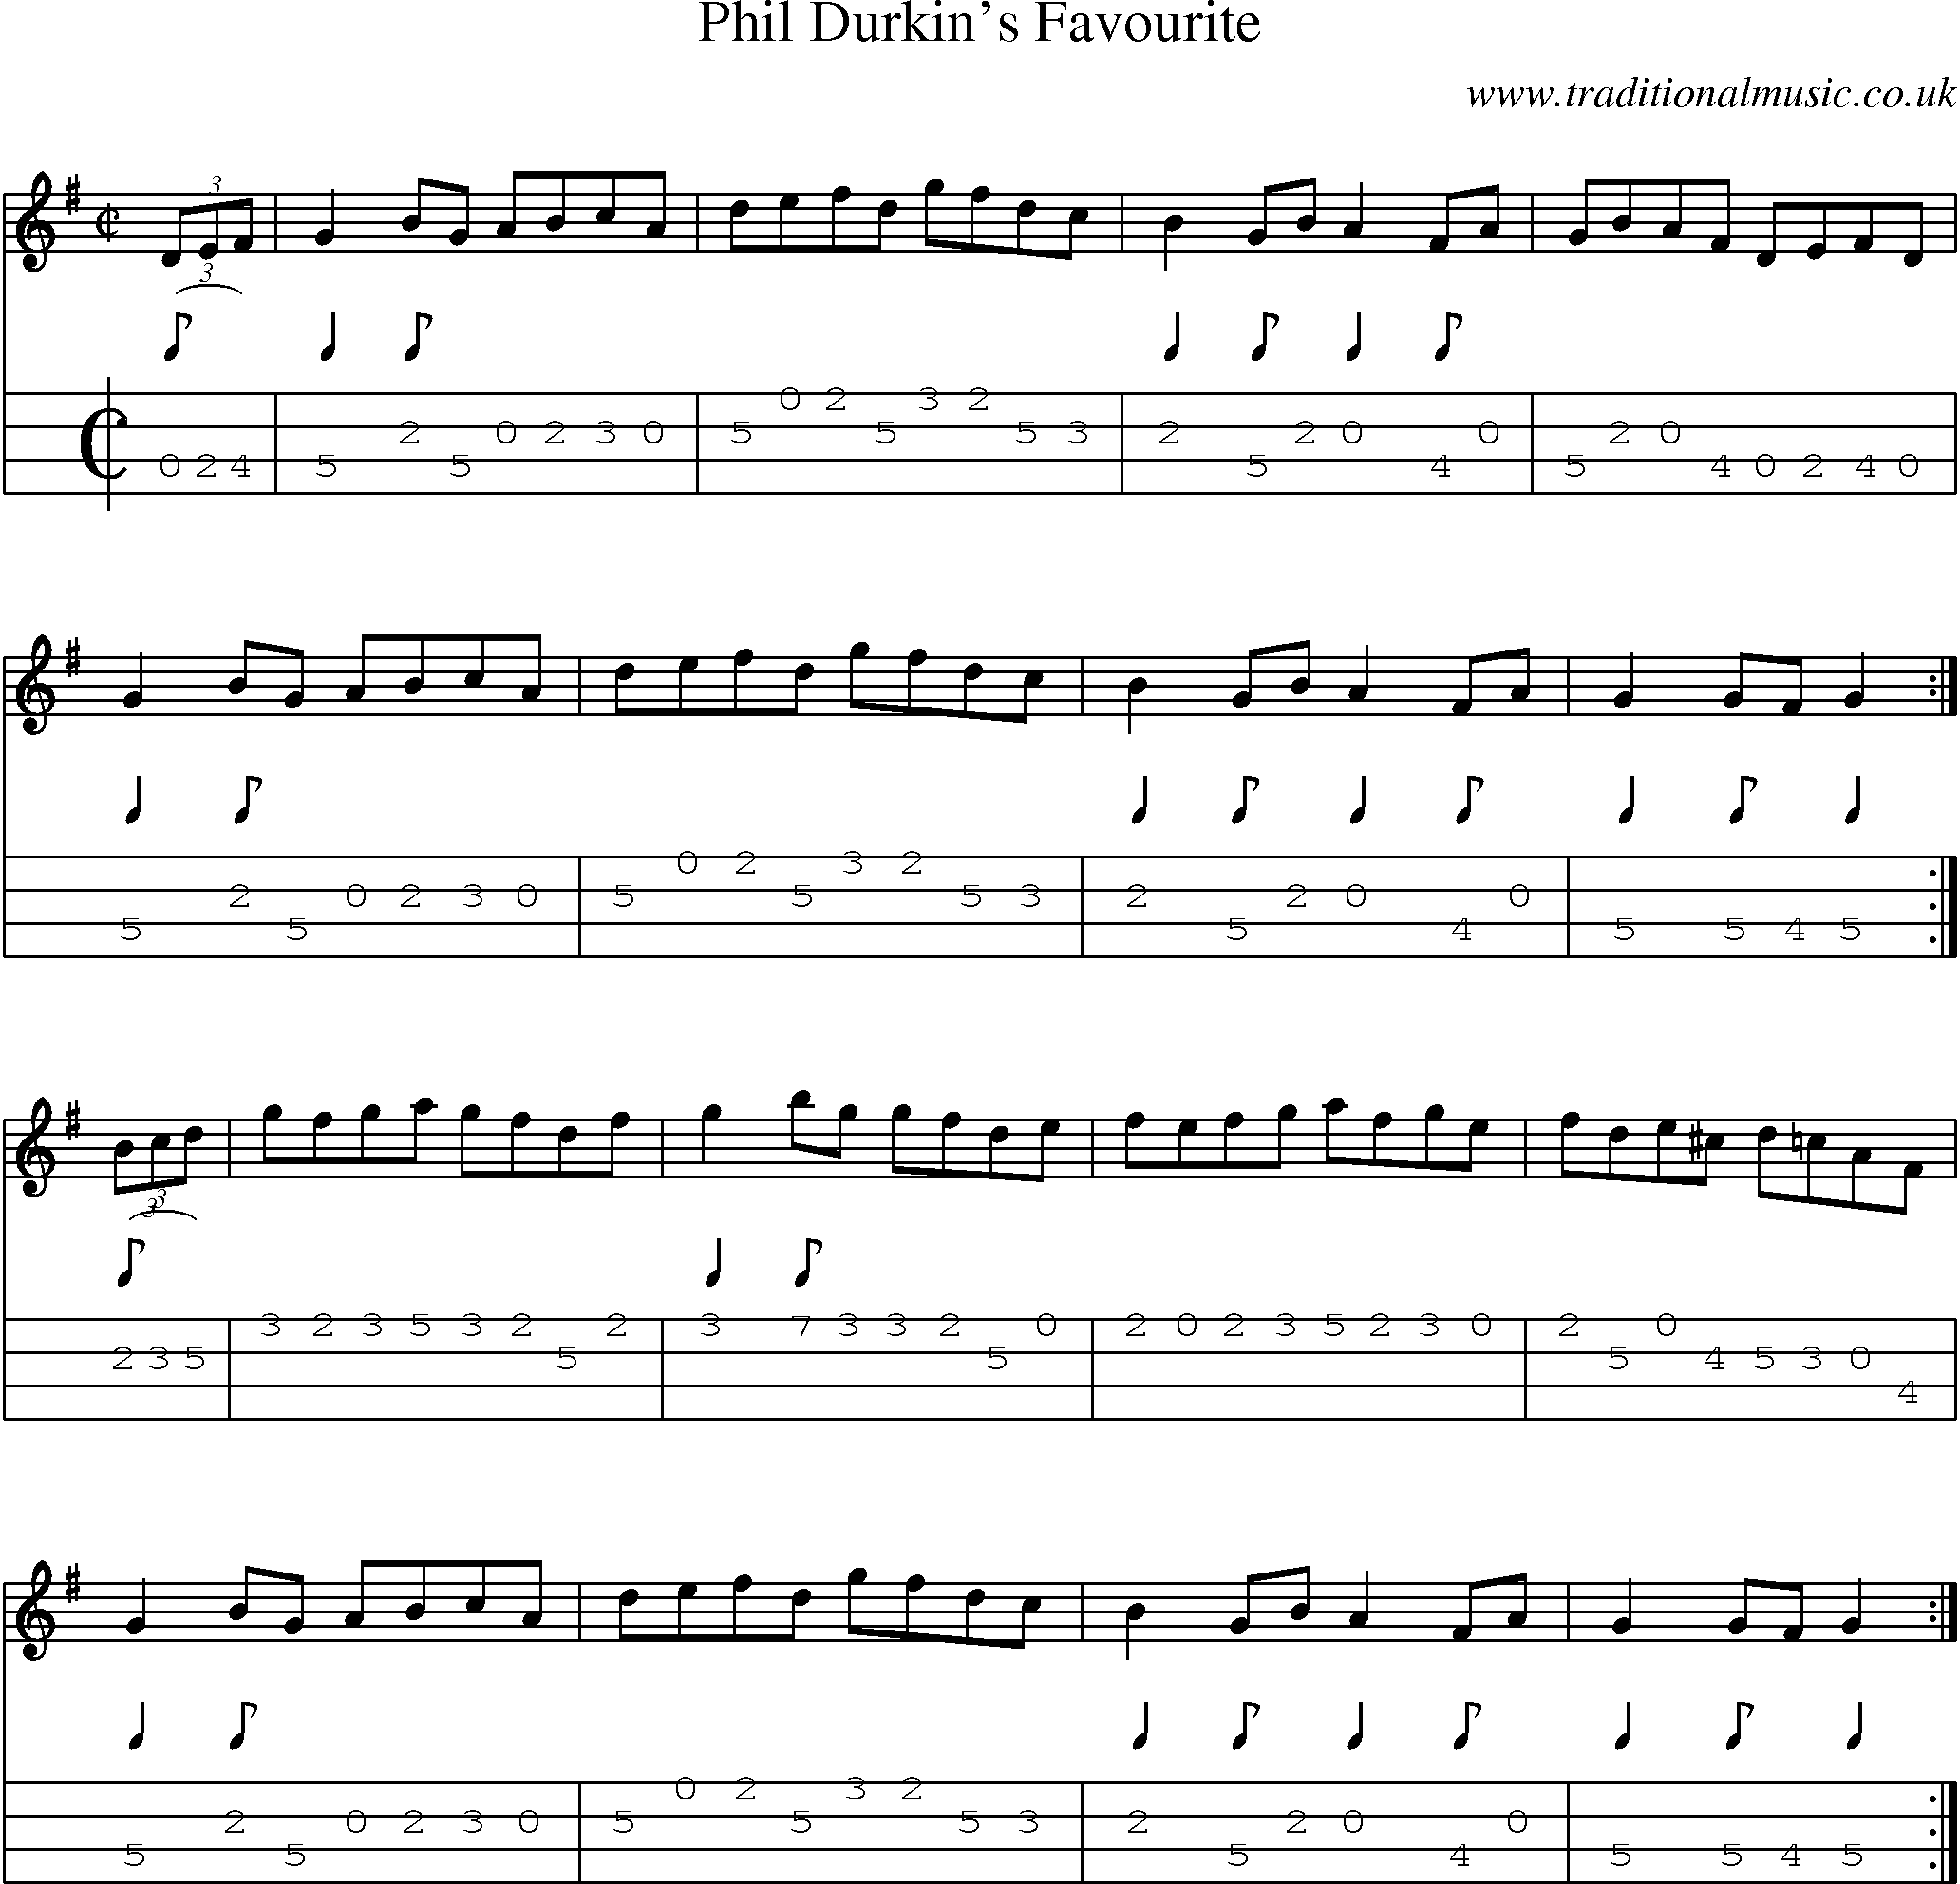 Music Score and Mandolin Tabs for Phil Durkins Favourite